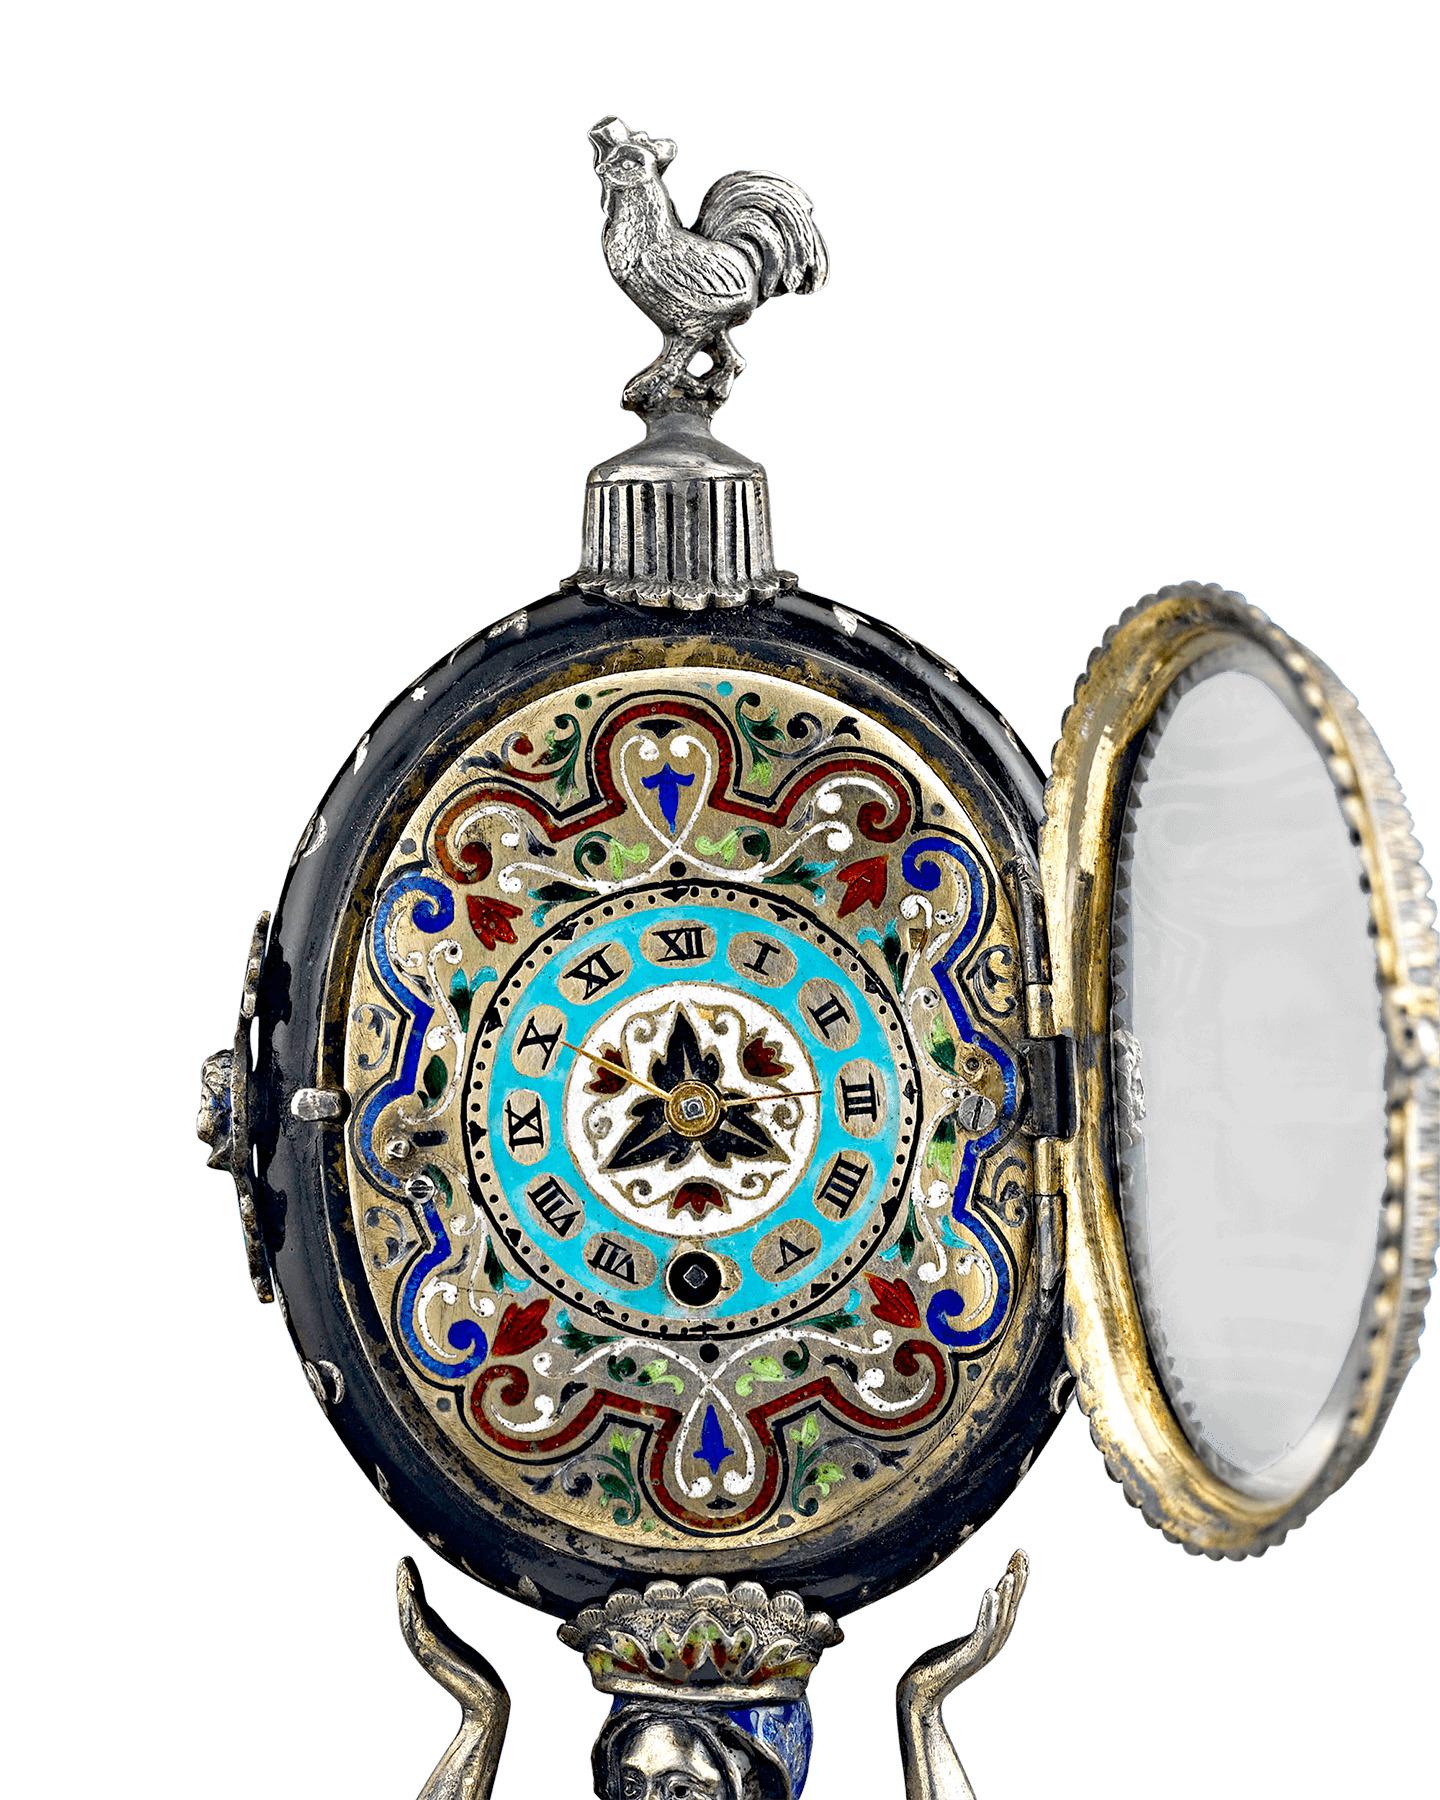 A work of exceptional detail, this magnificent Viennese clock takes the art form of enameling to new heights. The elaborately fashioned timepiece rests atop the head of a soldier, who stands on a pedestal populated by sphinxes. Exceptional details